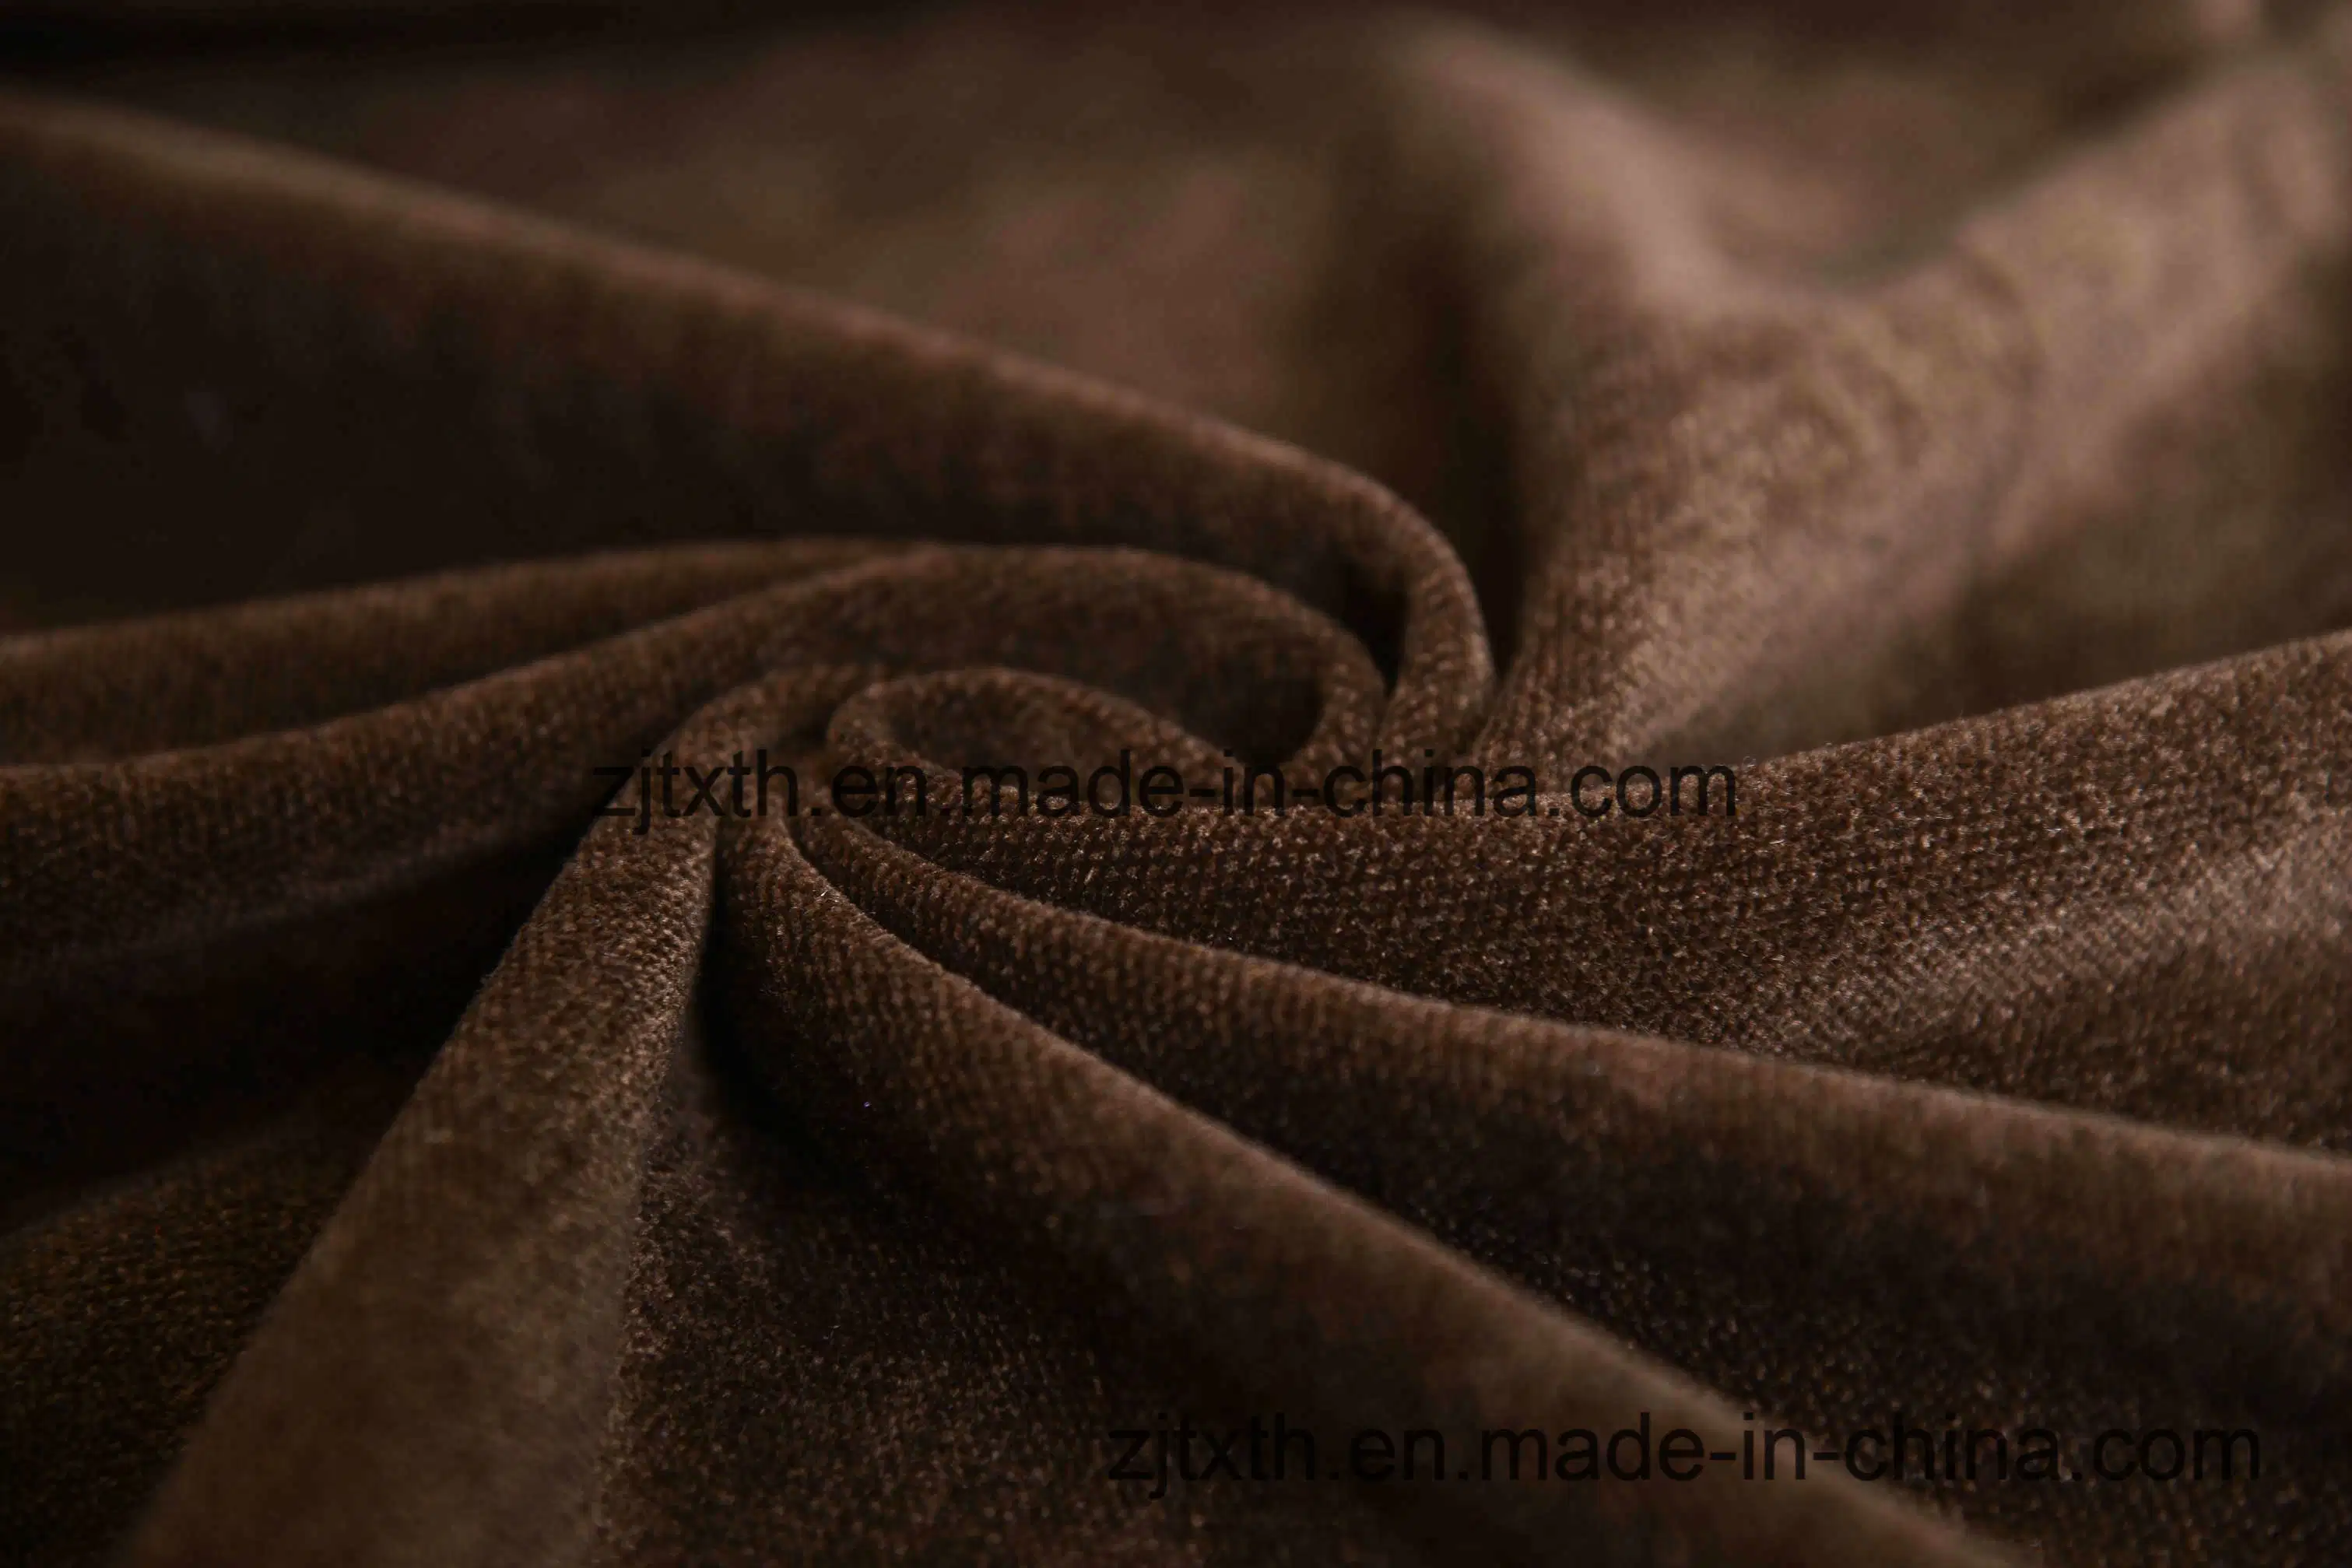 Plain Woven Chenille Sofa Fabric by Chocolate Color